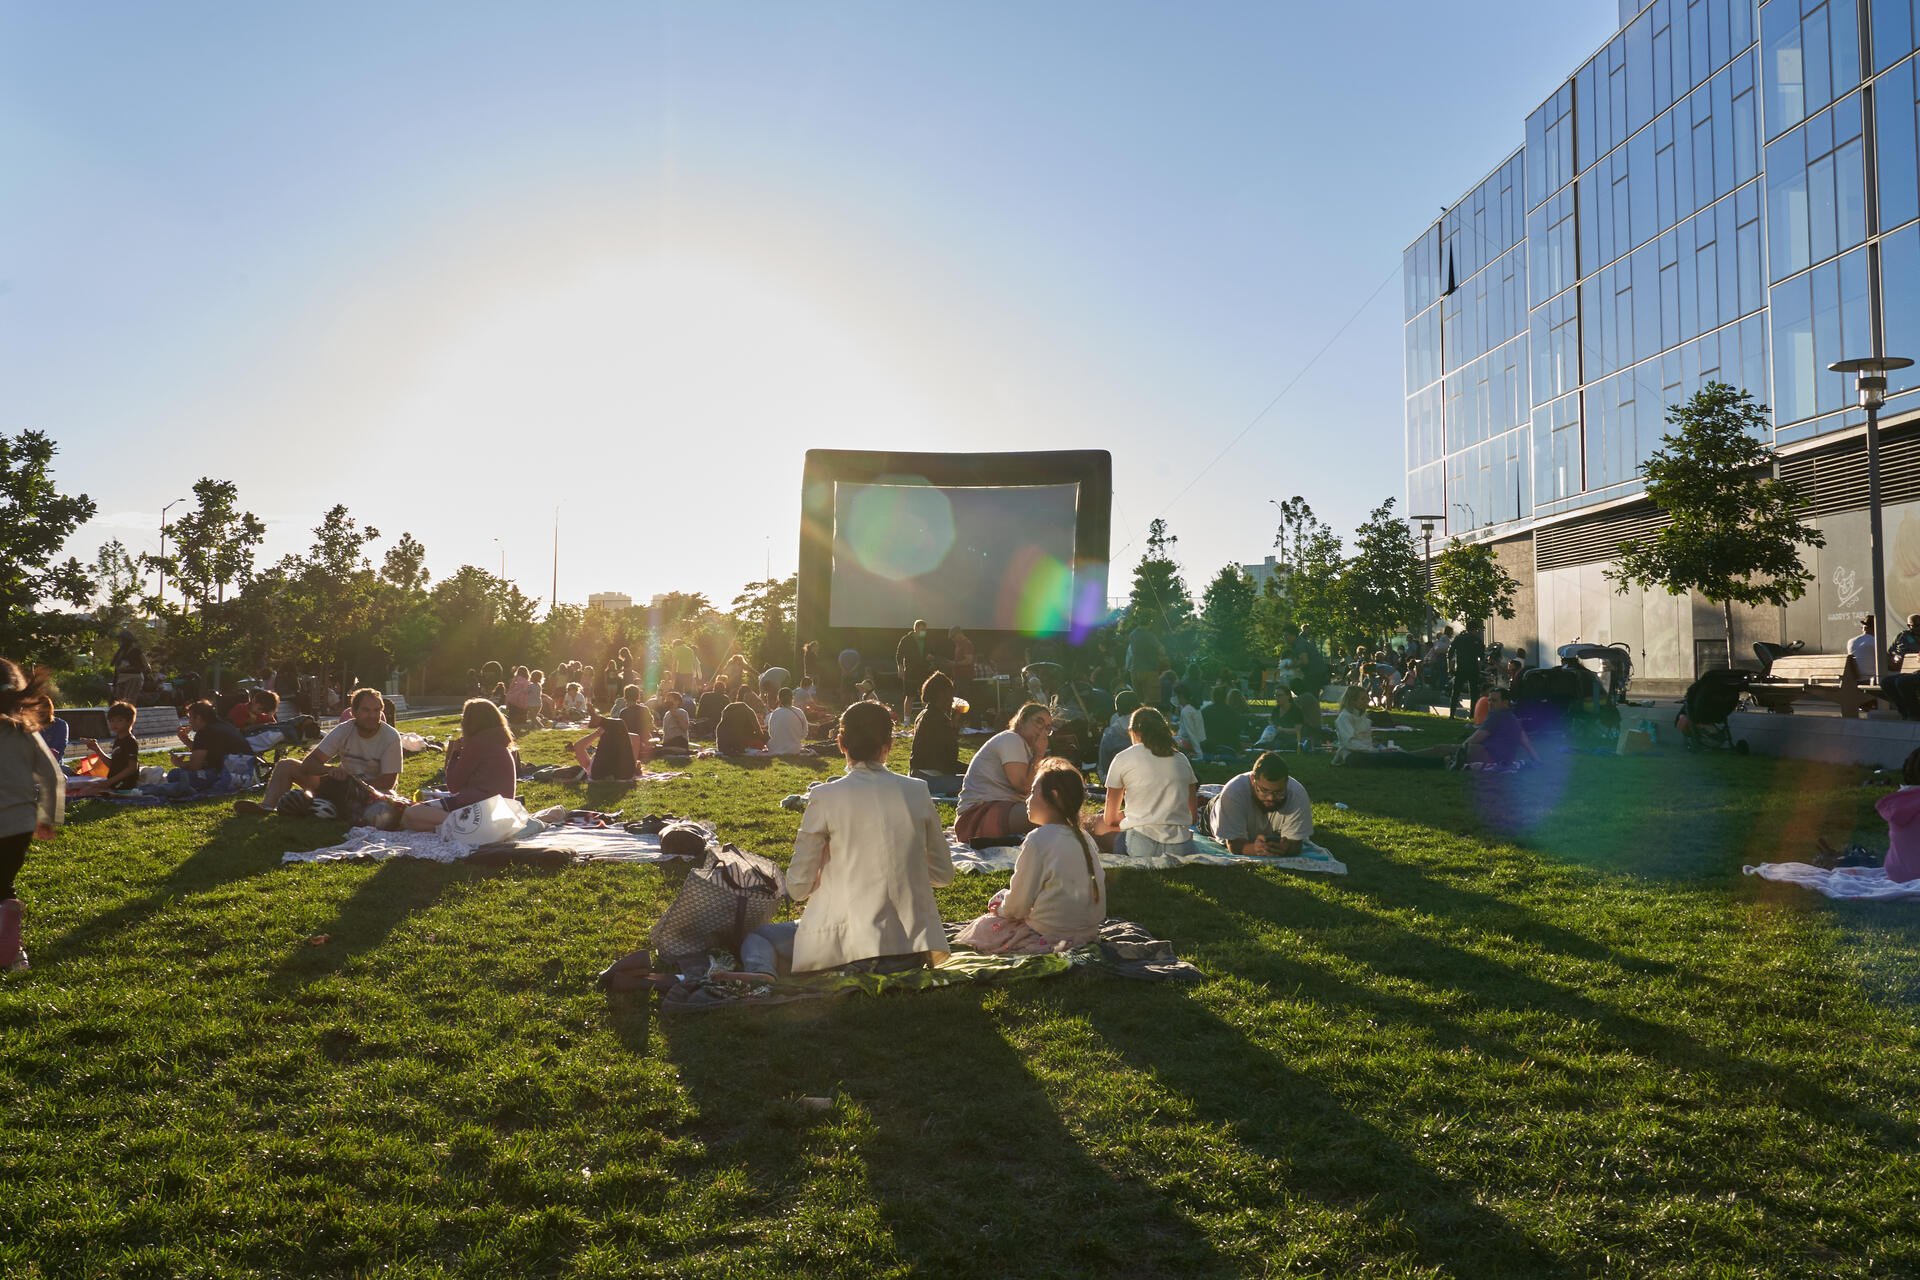 Outdoor community movie night on a sunny evening with people sitting on the grass enjoying a film on a large inflatable screen.